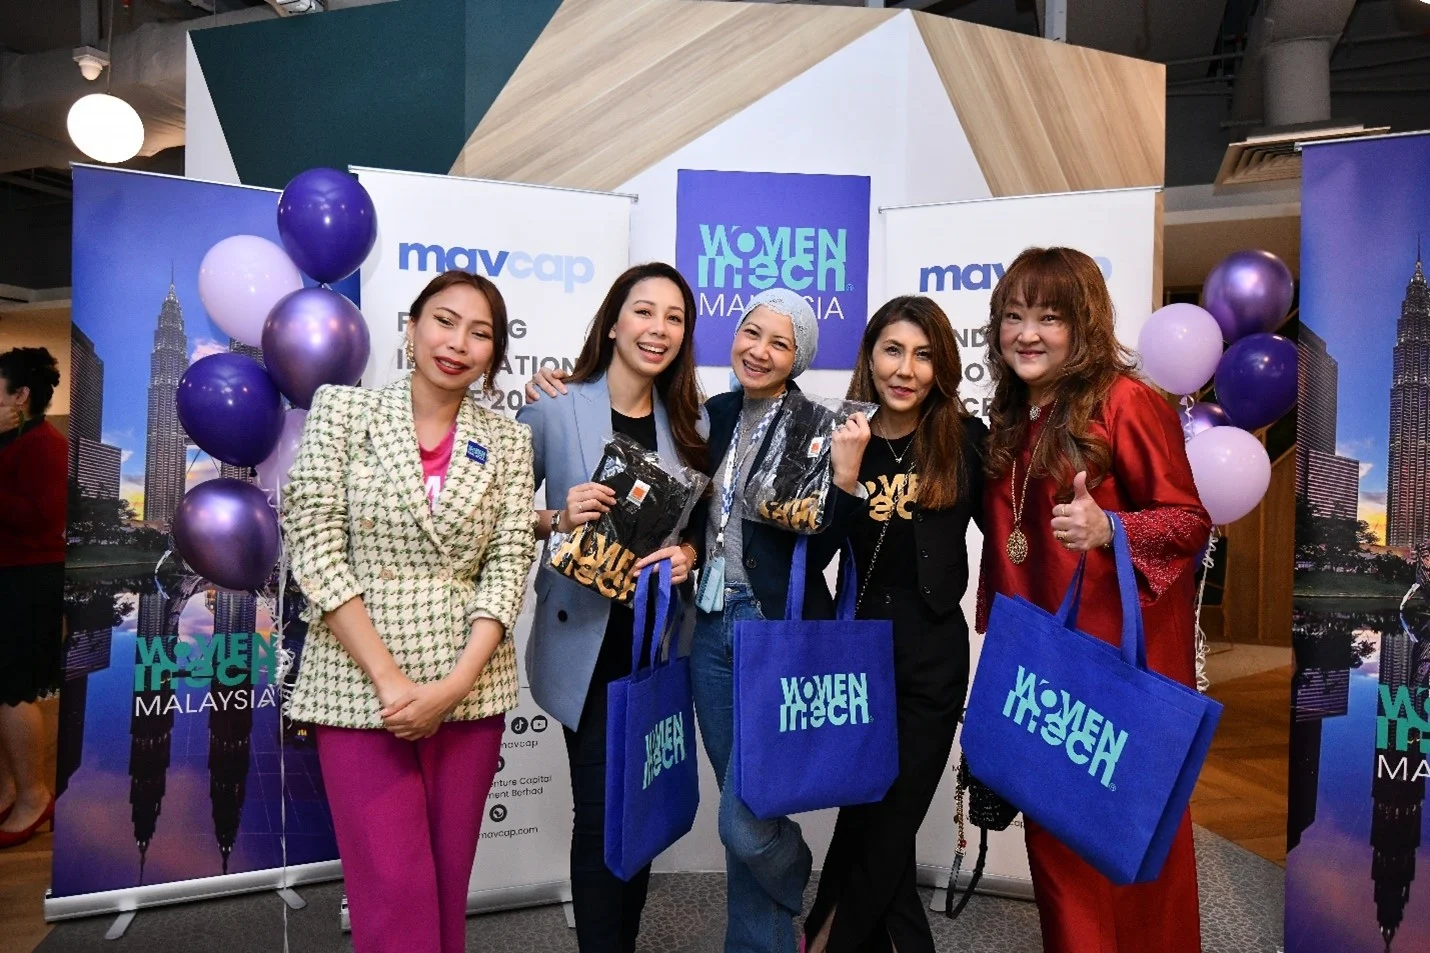 MAVCAP’s COO, Noor Amy Ismail with panel speakers for the Women in Tech 1st Anniversary Event.Featuring Madiha Fuad, Founder & CEO of Plusvibes. Yuki Aizawa, Country Director of Women In Tech, Malaysia and Jun Maria, Director, Human Capital Management of Payments Network Malaysia 